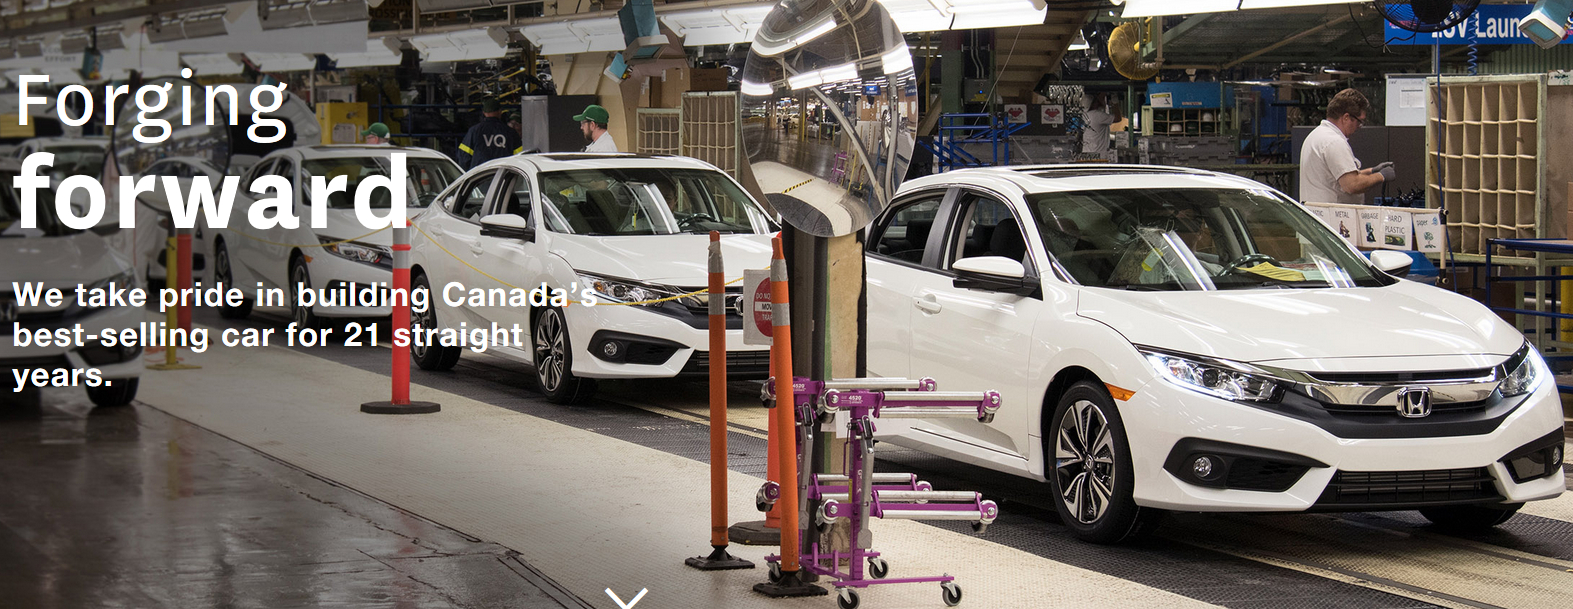 Honda of Canada Mfg. Facility Tour -- See the Civic being Assembled!!! 647